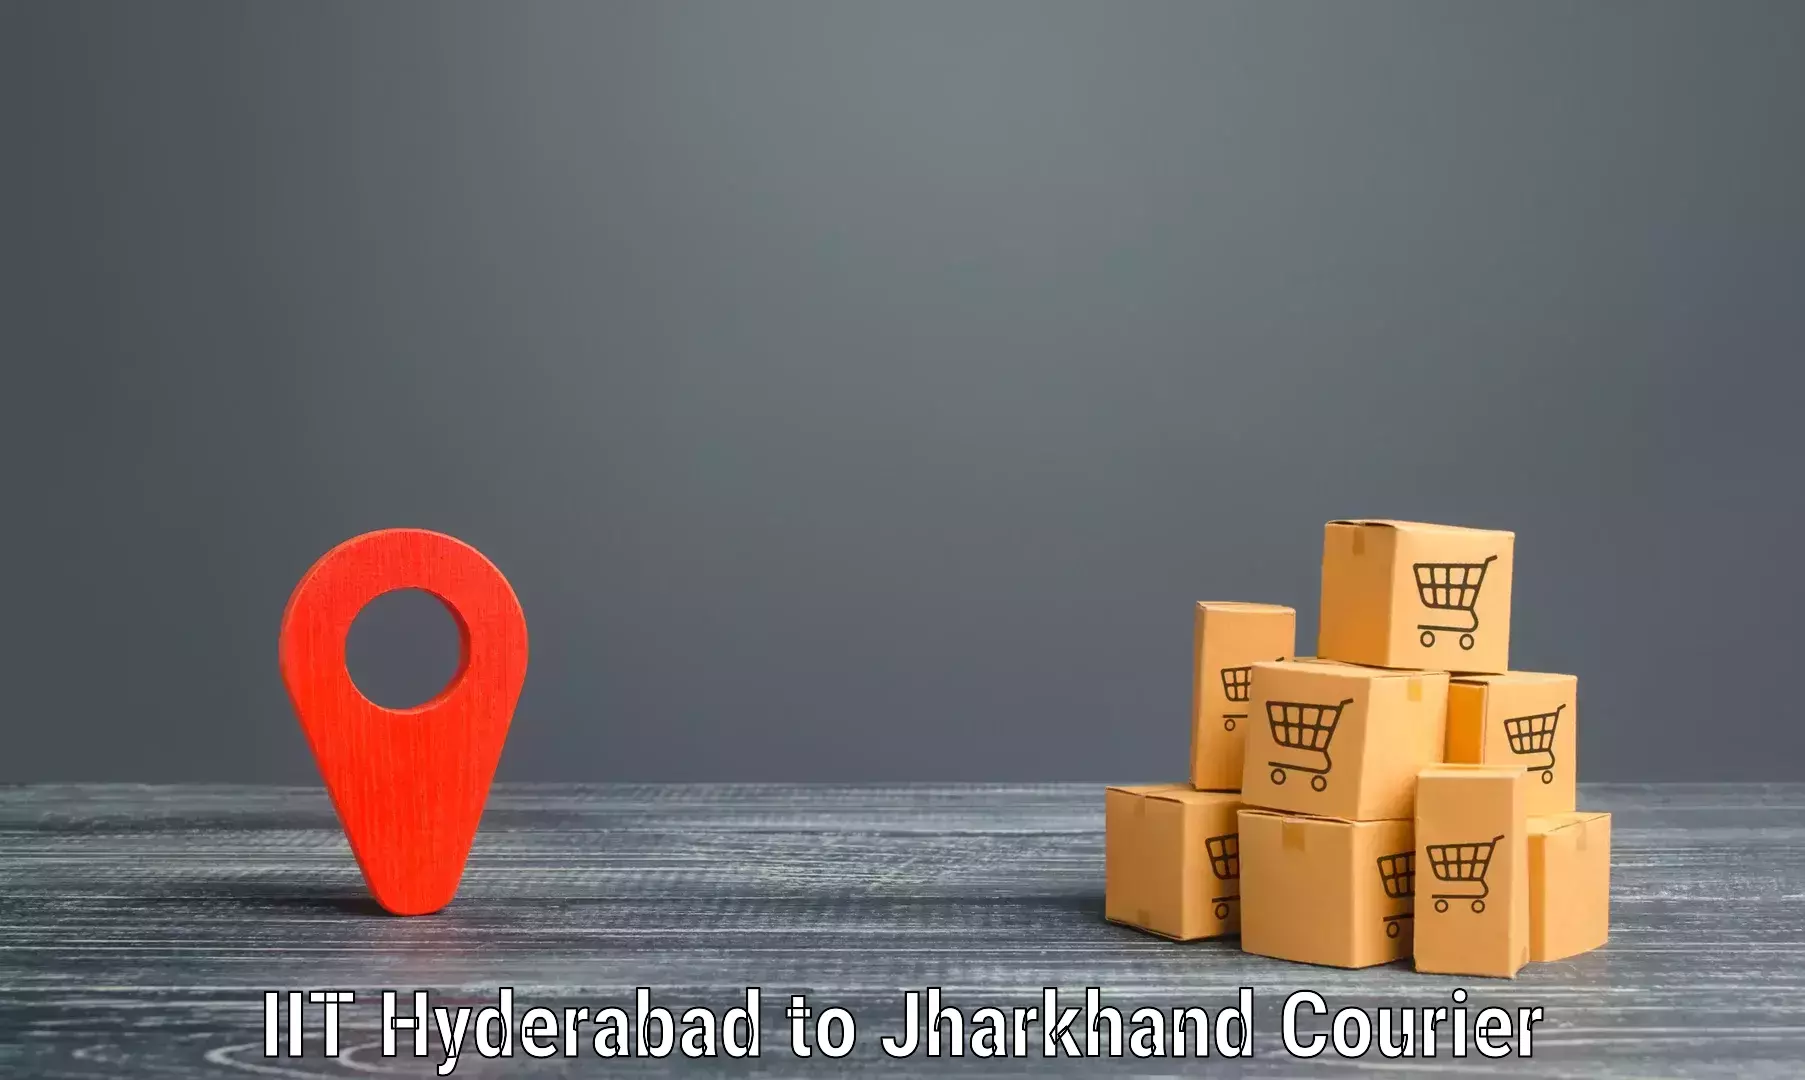 Courier service partnerships IIT Hyderabad to Tandwa